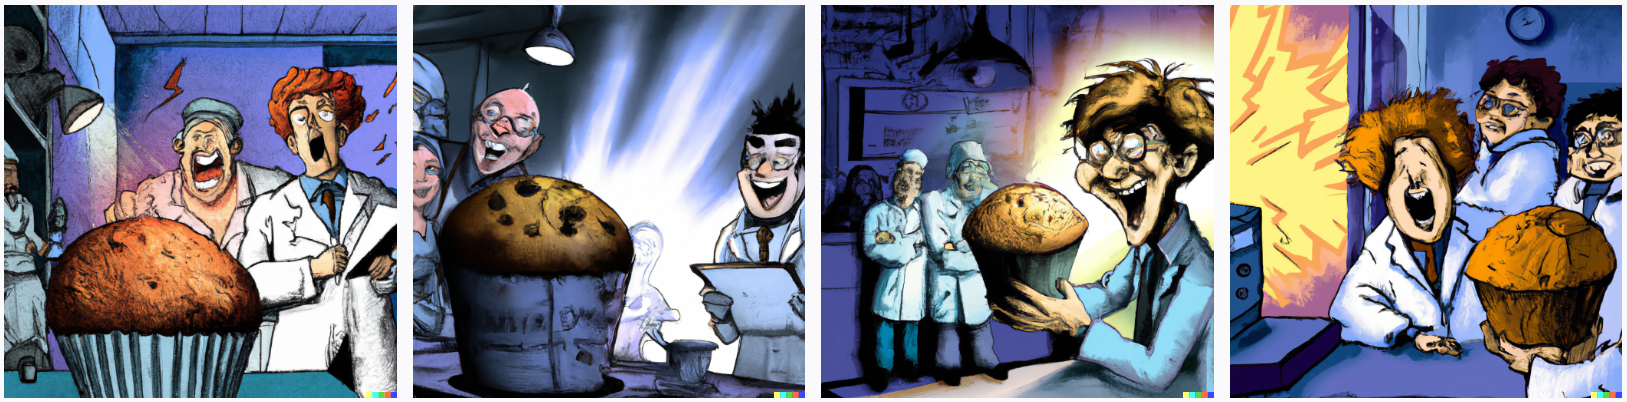 muffin man laughing maniacally in a dark laboratory while holding a large muffin with scientists watching in the background comic book art